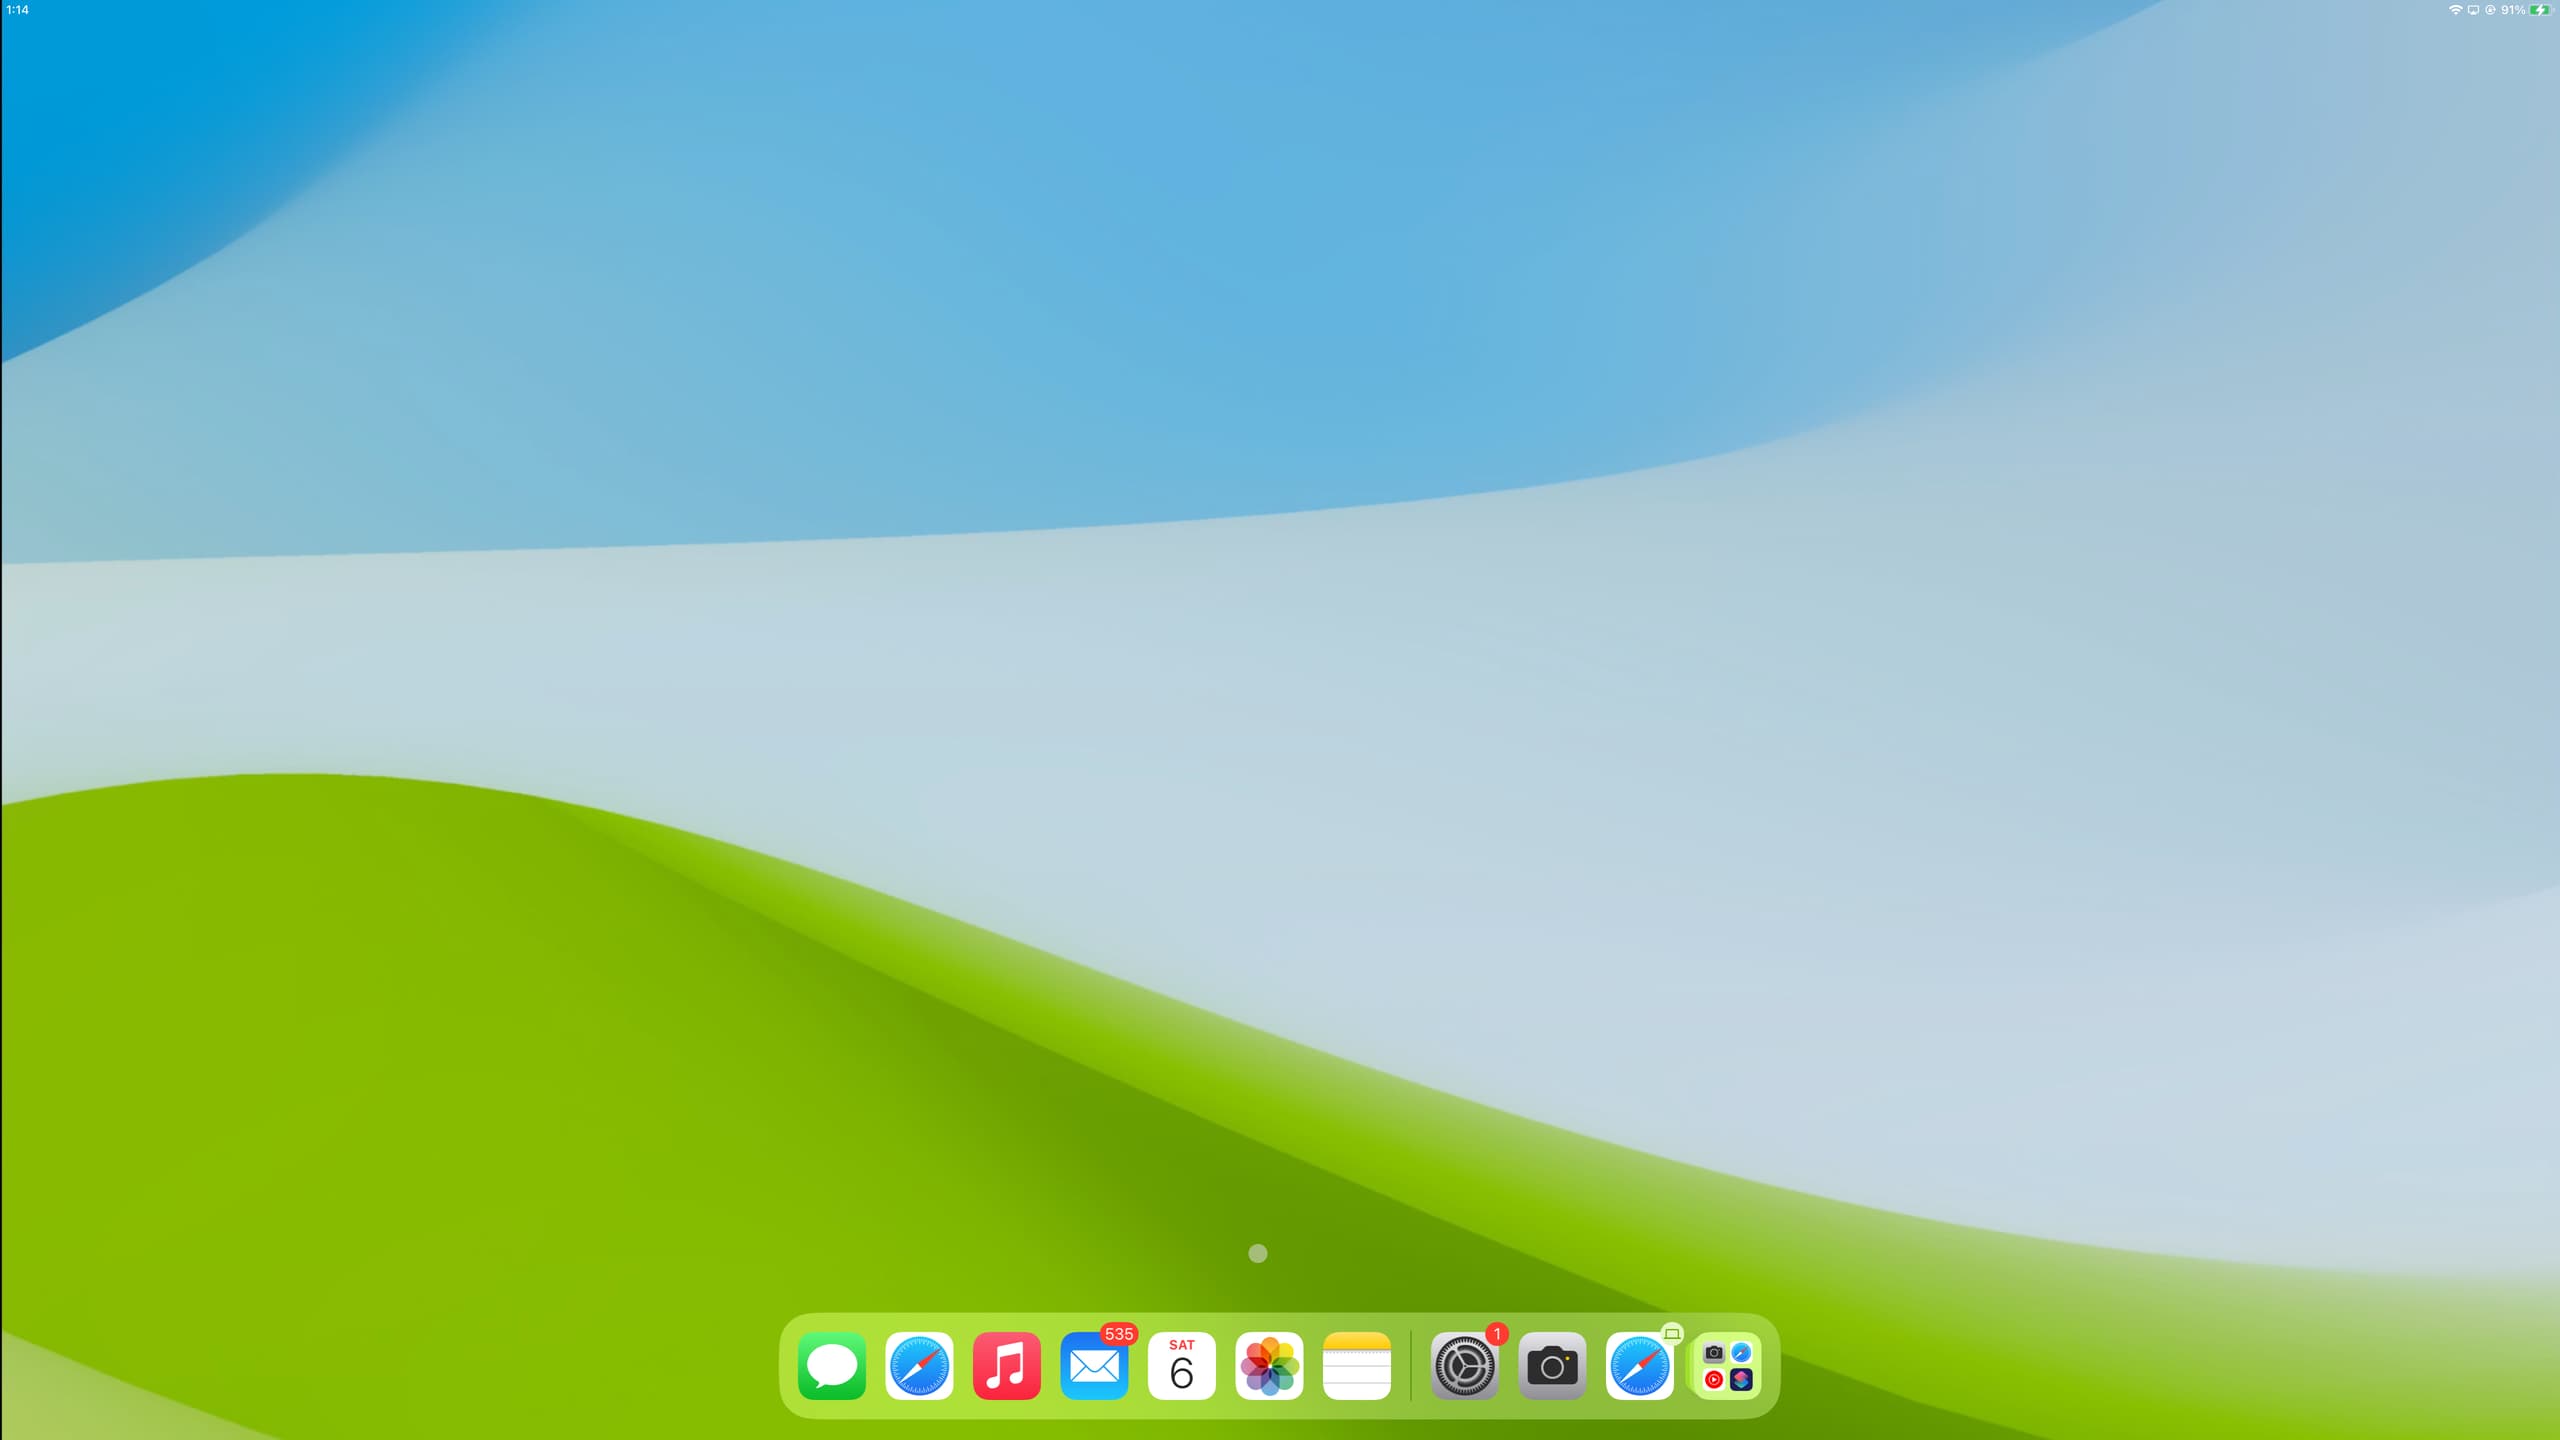 iPad desktop without Home Screen app icons visible on the connected monitor